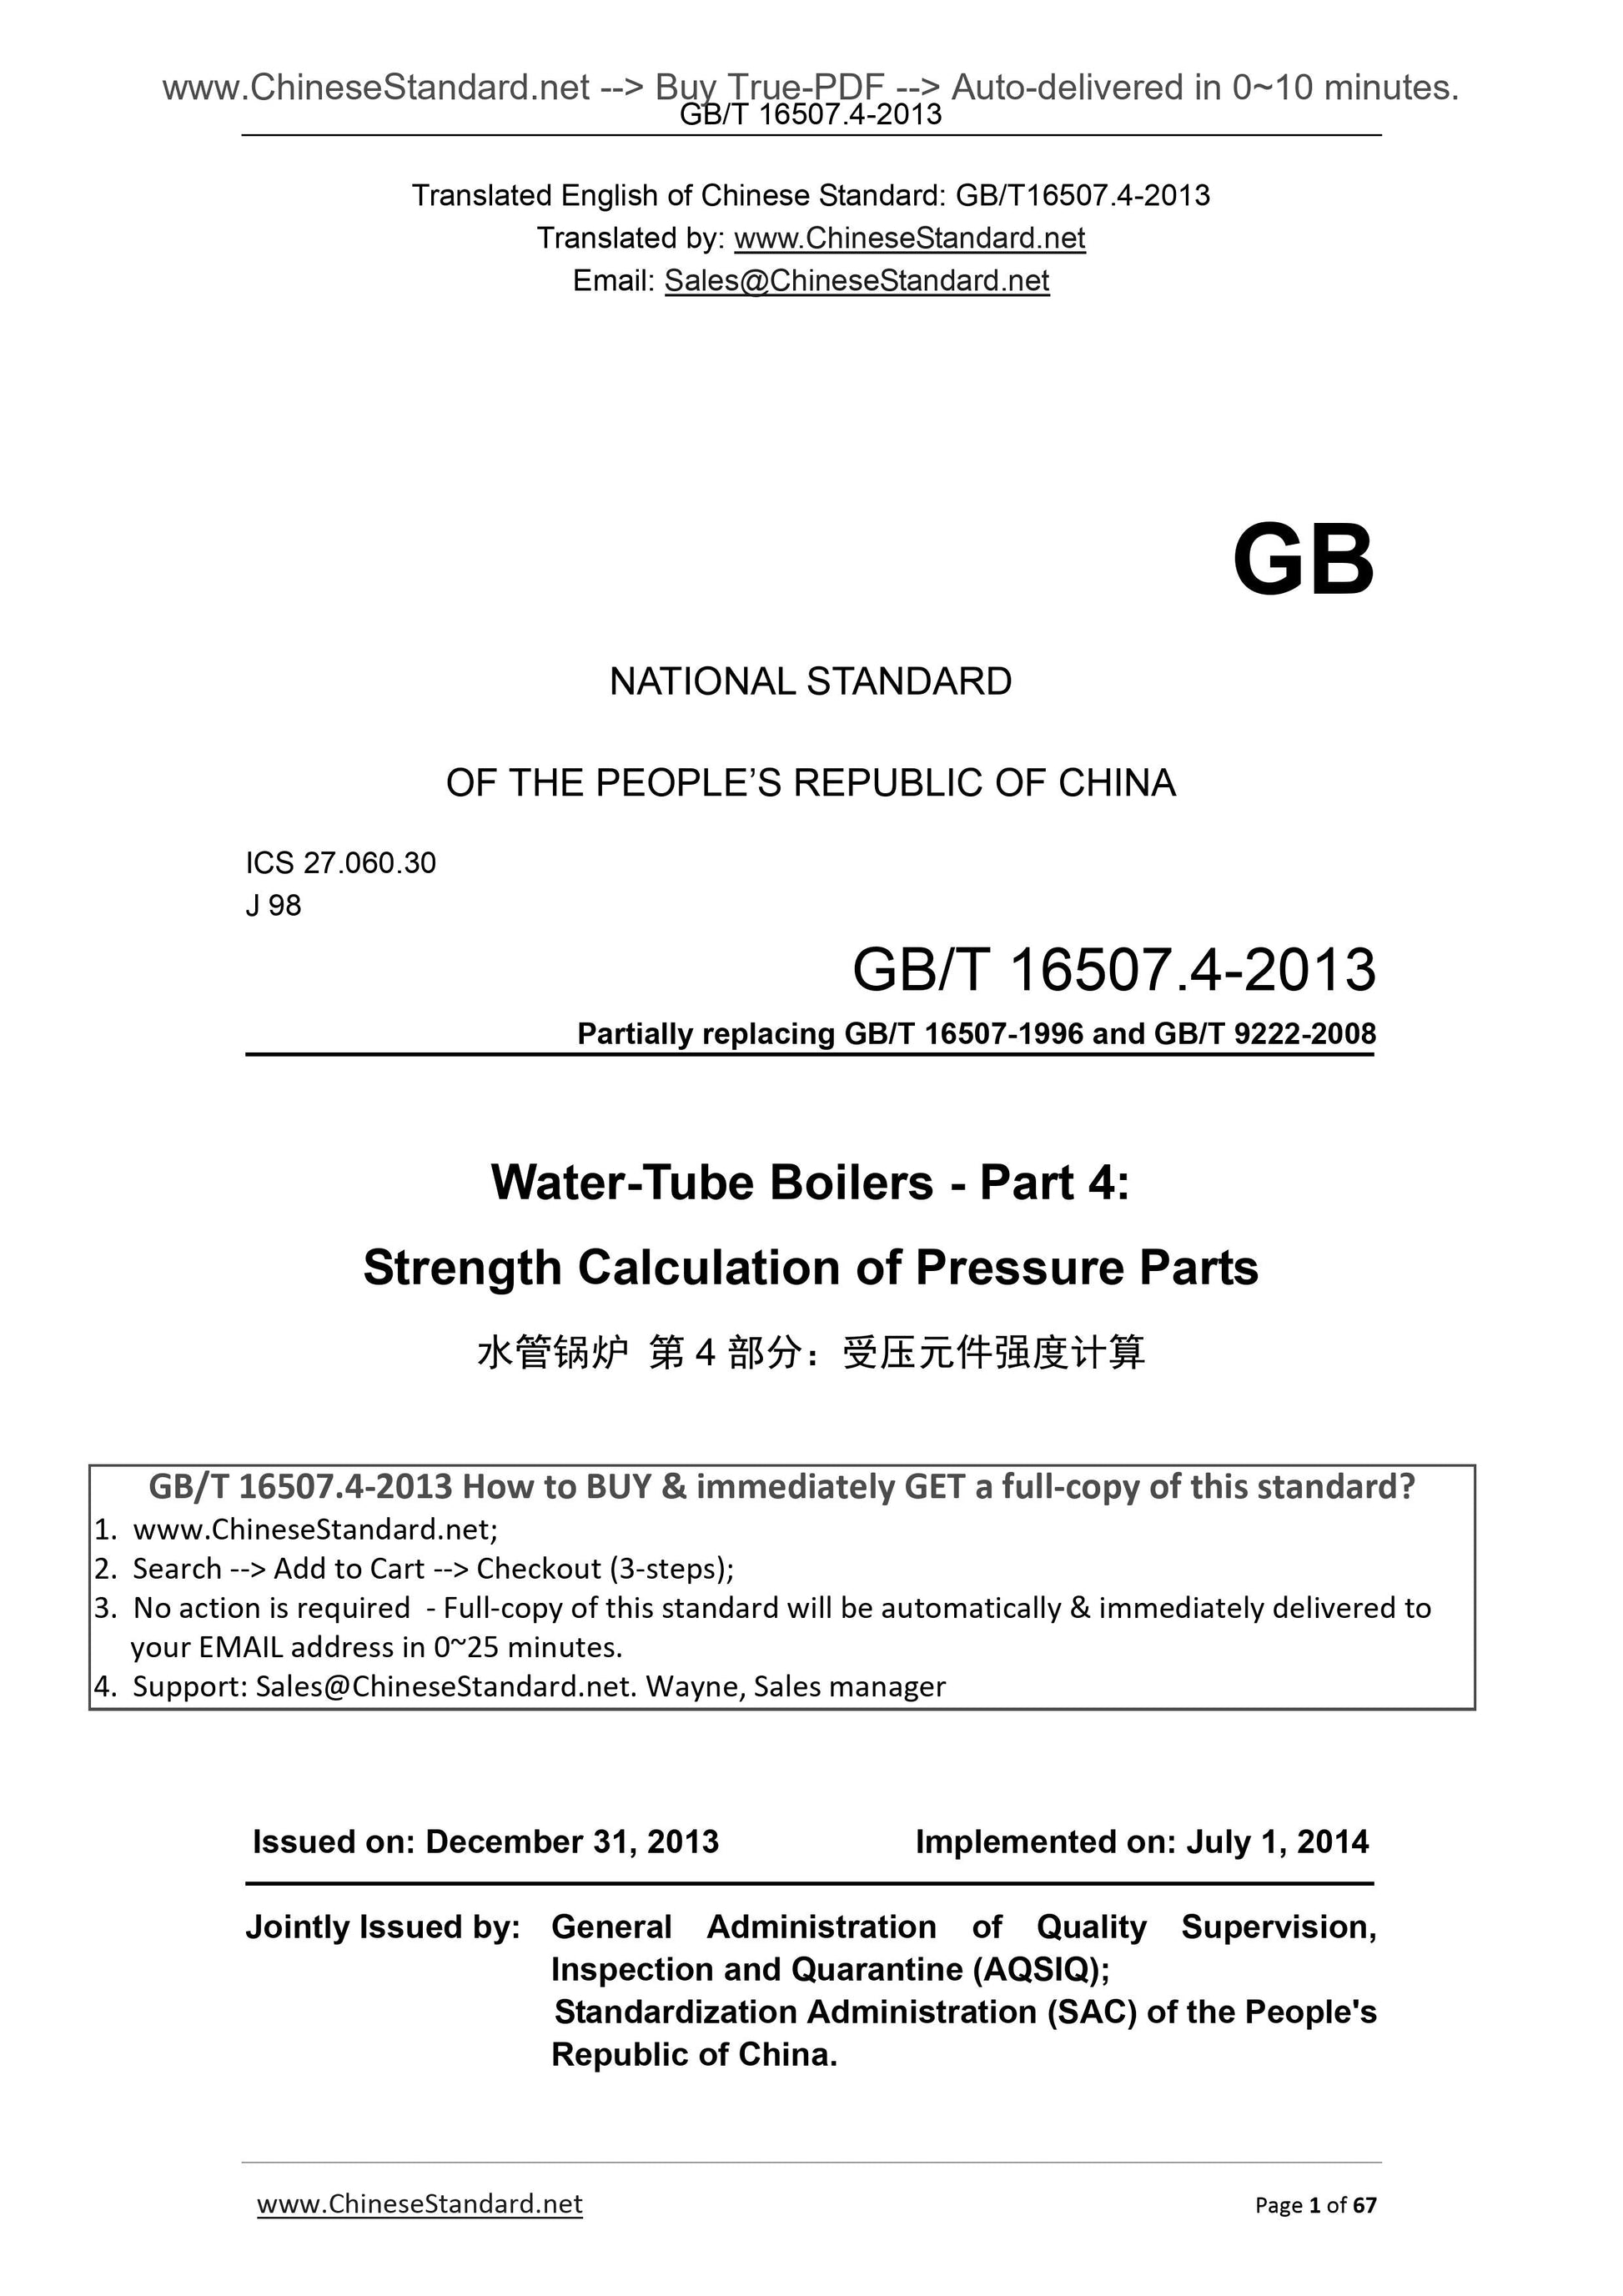 GB/T 16507.4-2013 Page 1